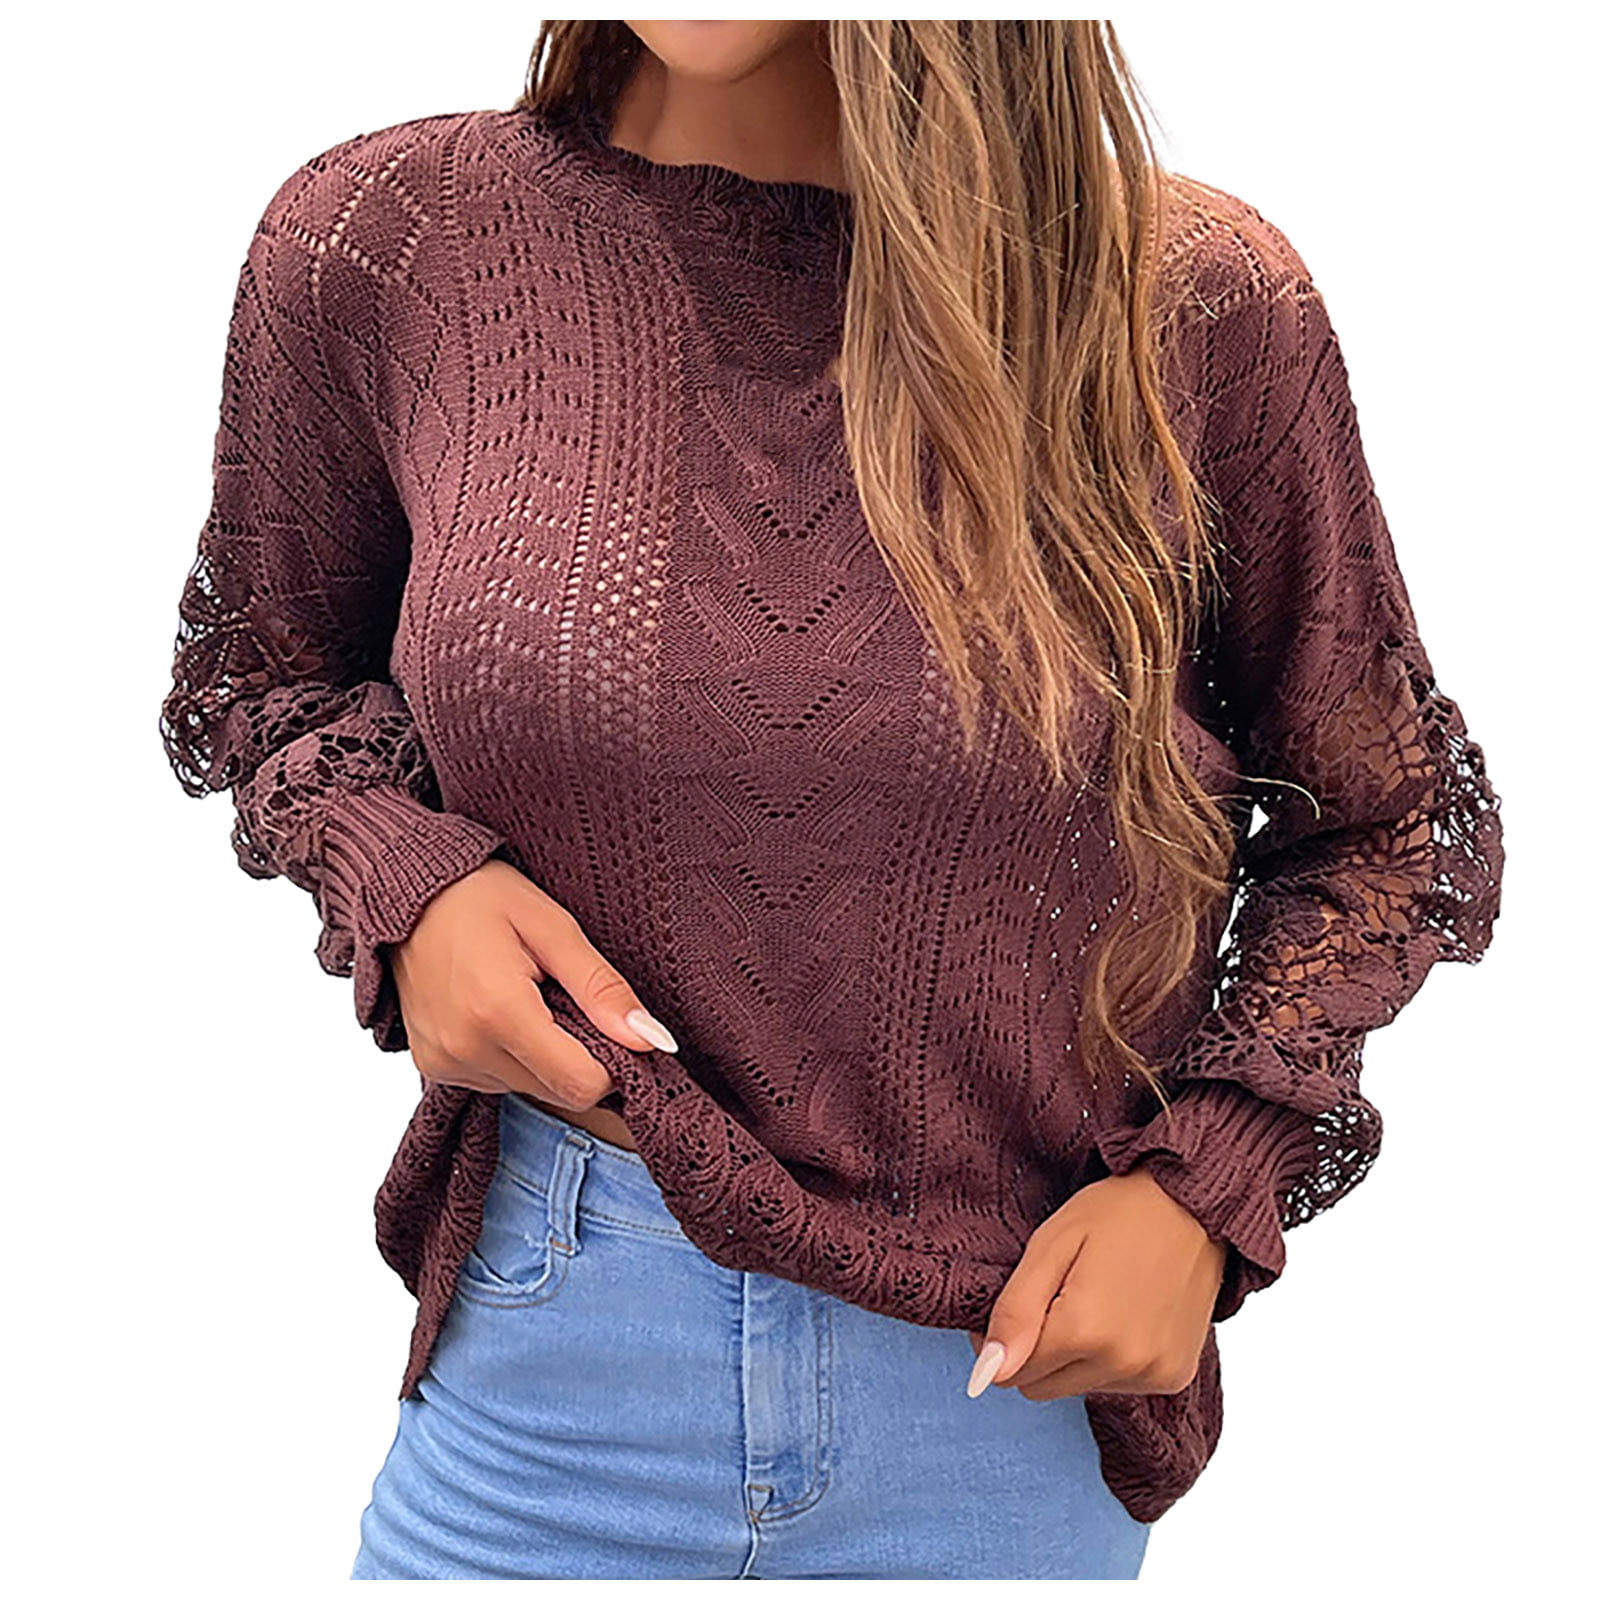 Women Elegant Long Sleeve O-Neck Loose Hollow Out Knitted Pullover Sweater LG 